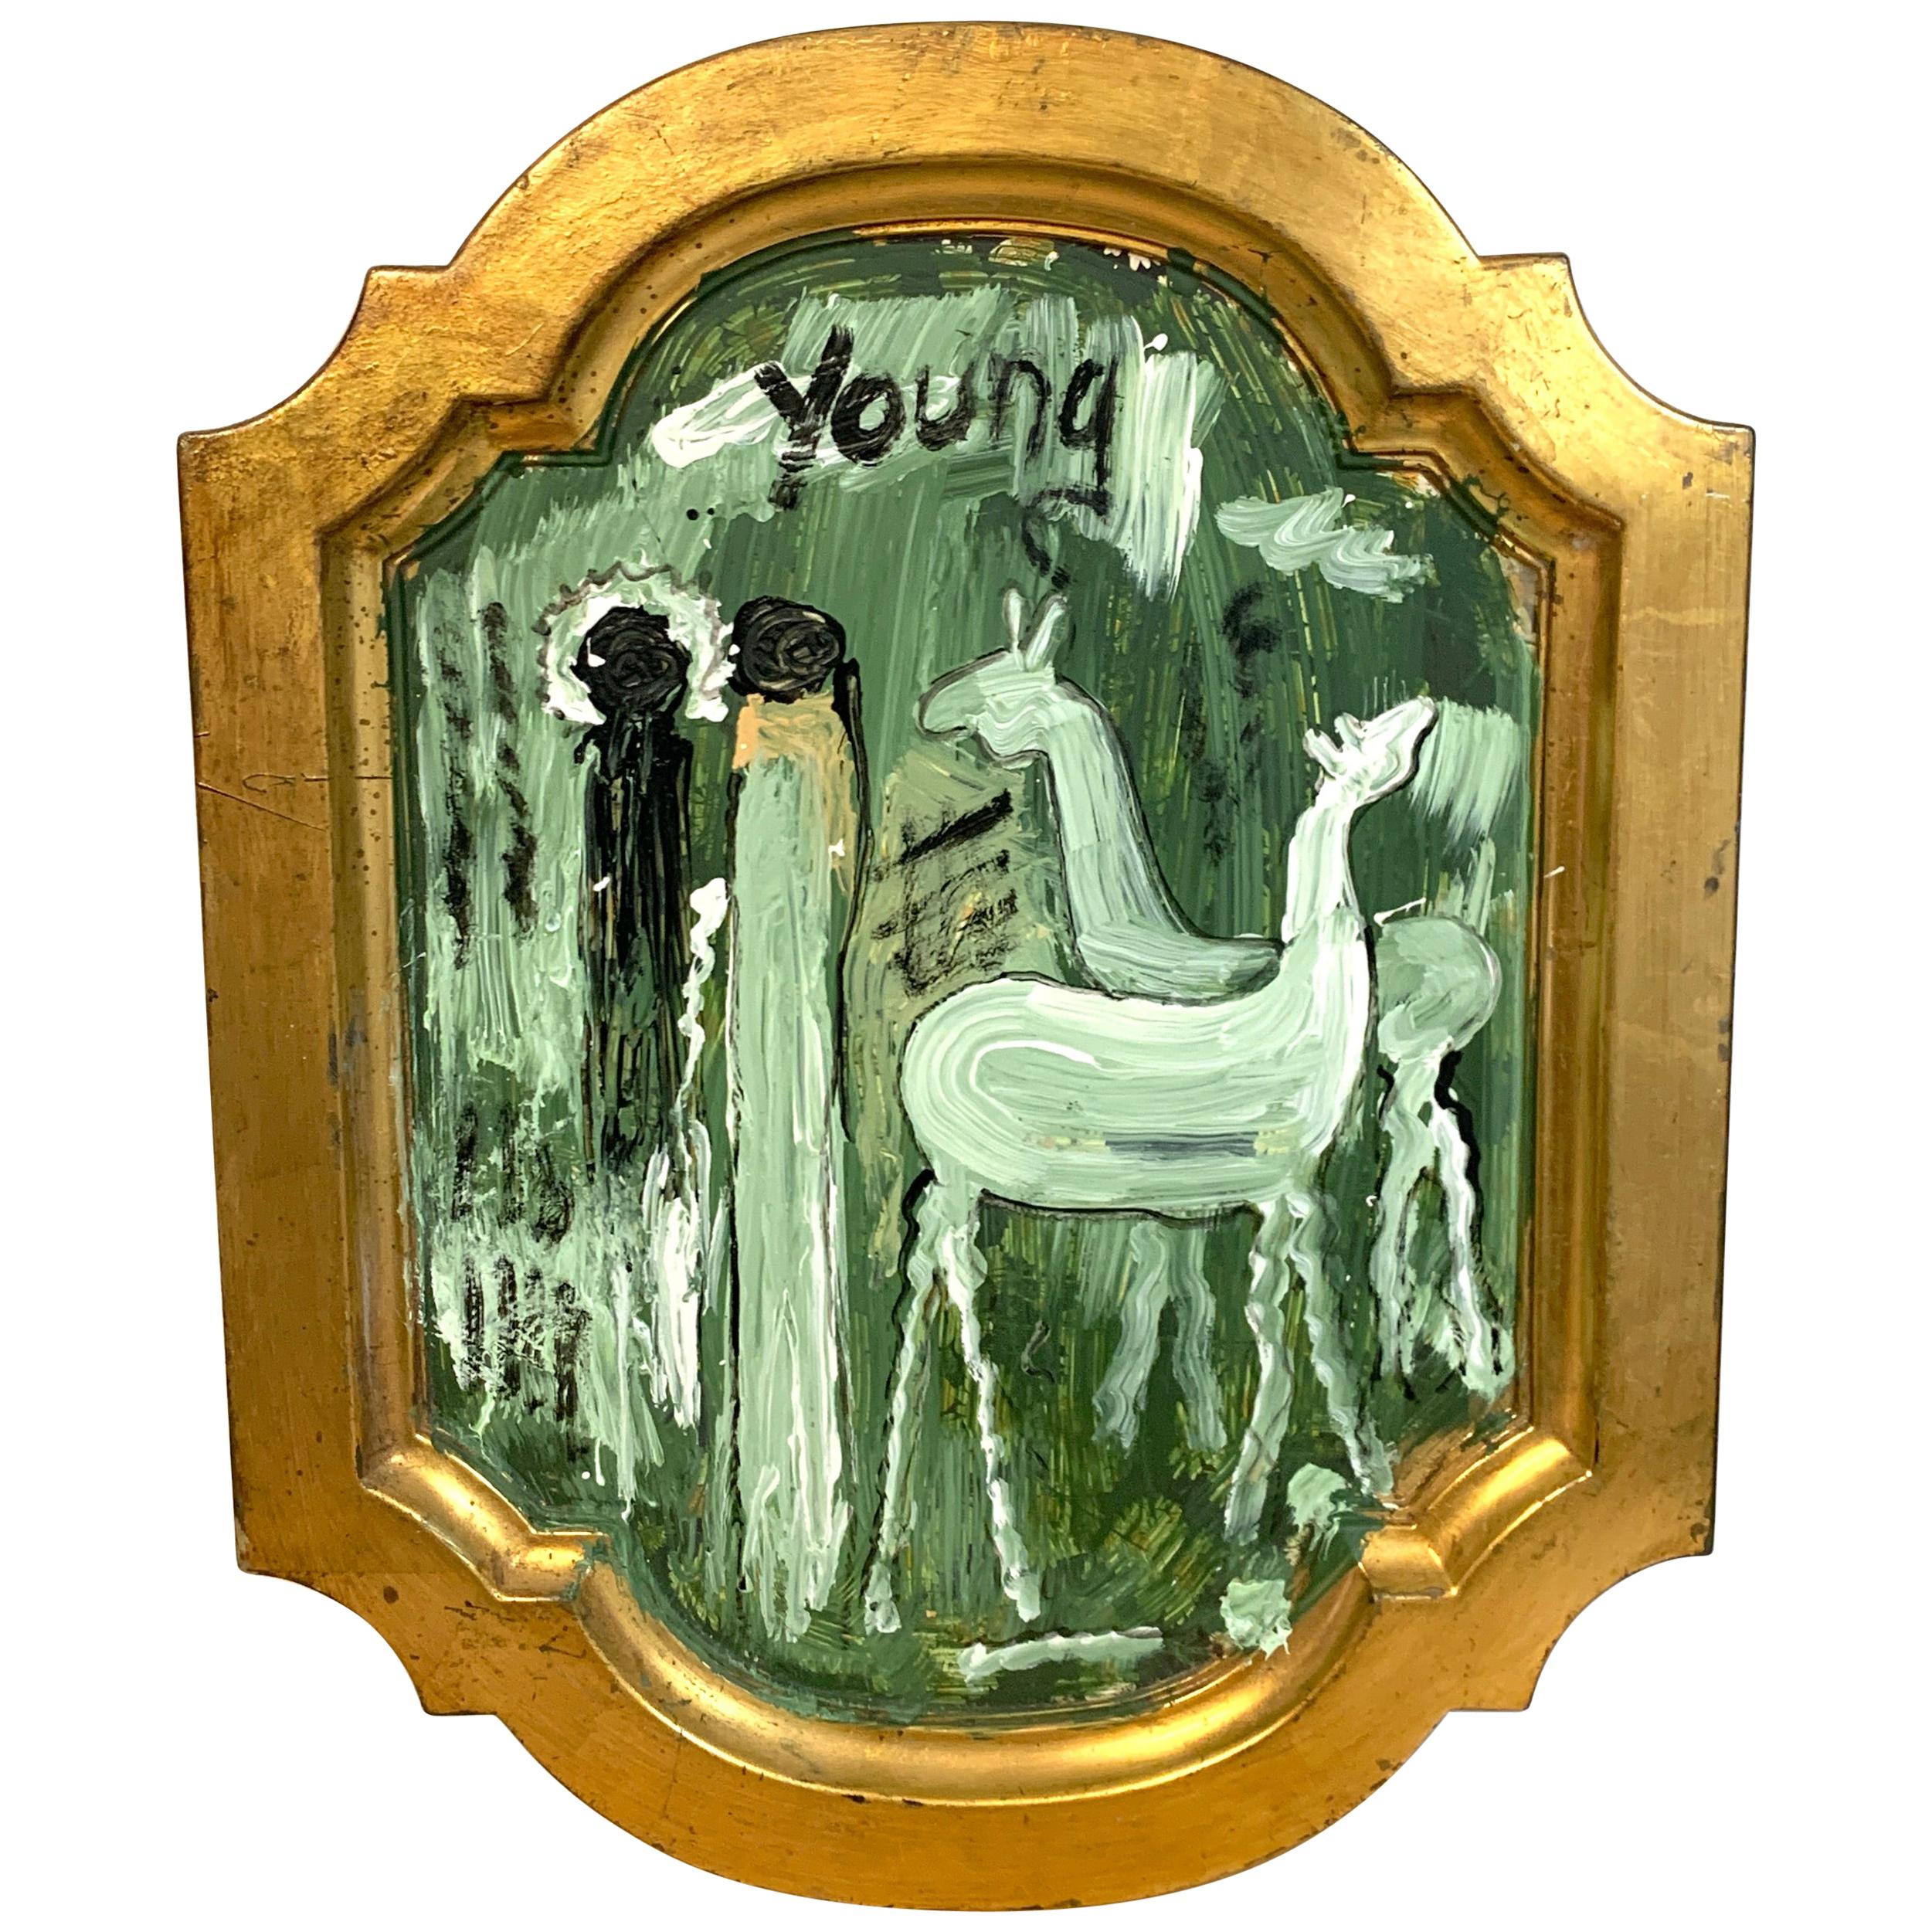 Purvis Young figures & horses in landscape
Purvis Young (1943-2010) 
Painted on a 'formal' Italian gilt lacquered tray, framing the 14.5